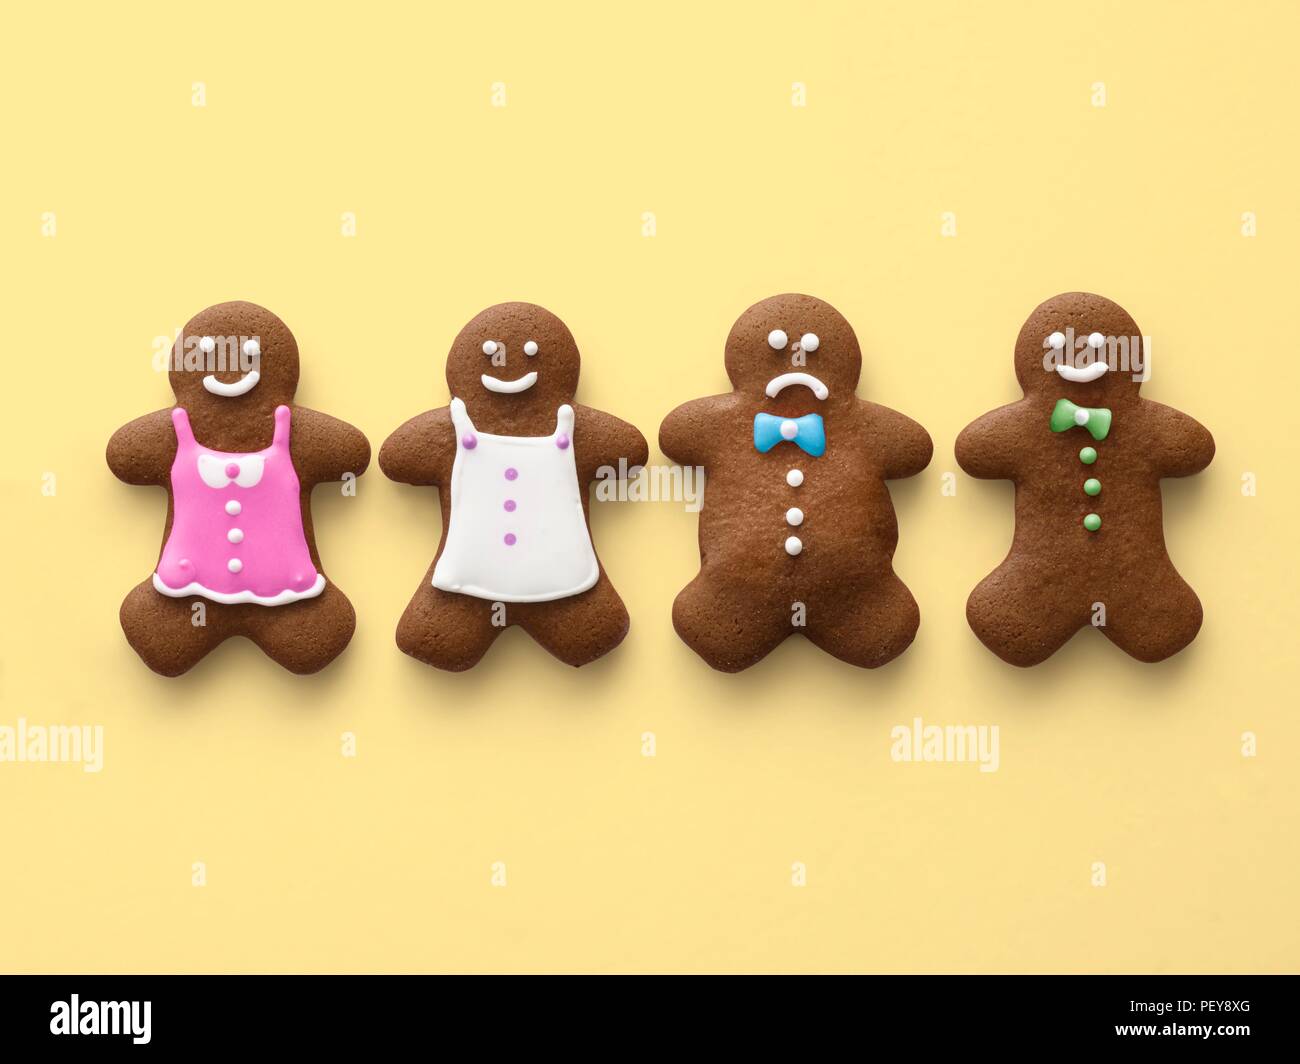 Four gingerbread men and women. Stock Photo